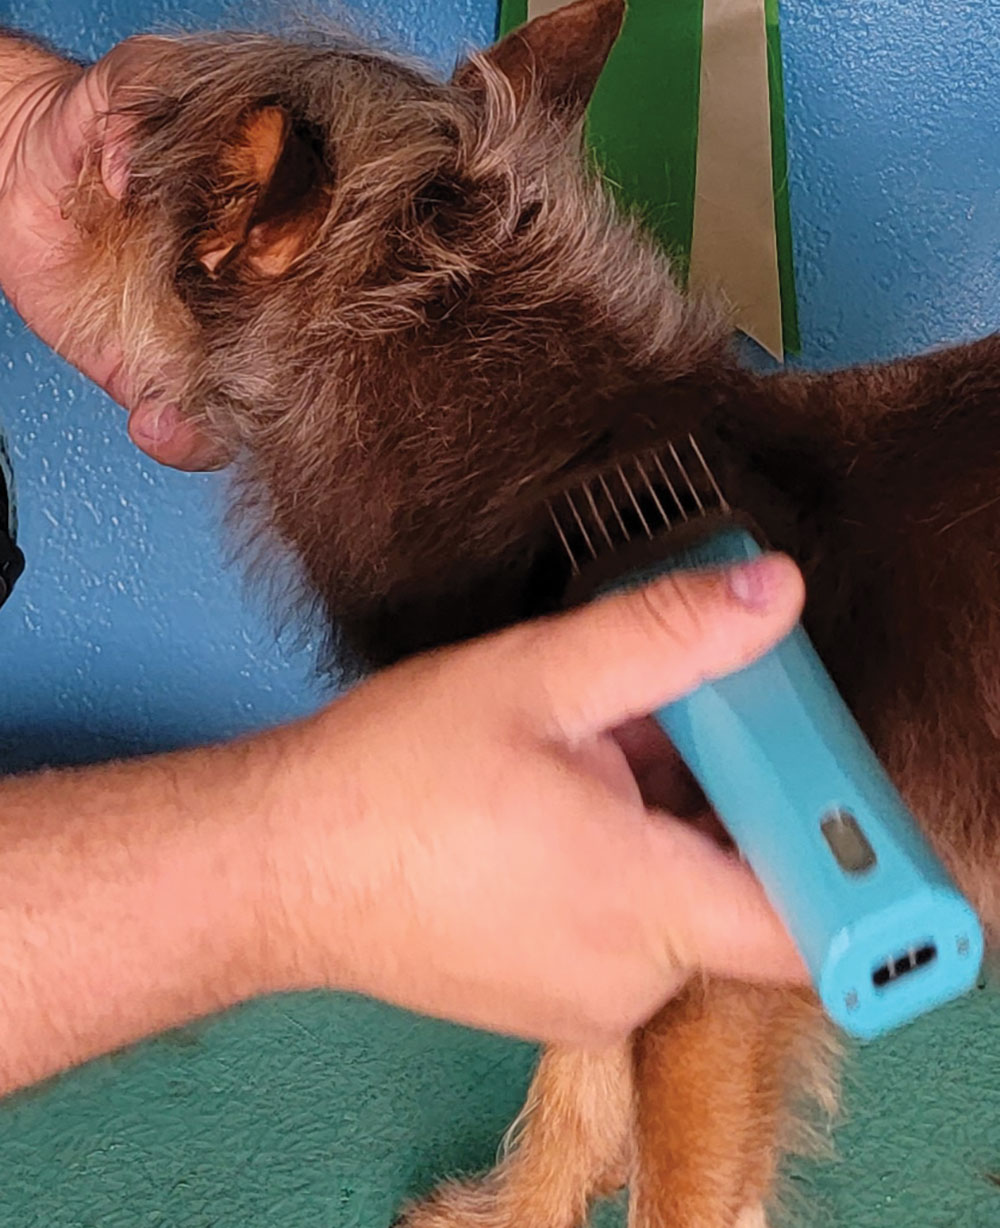 While clipping, avoid the “ruff” area.